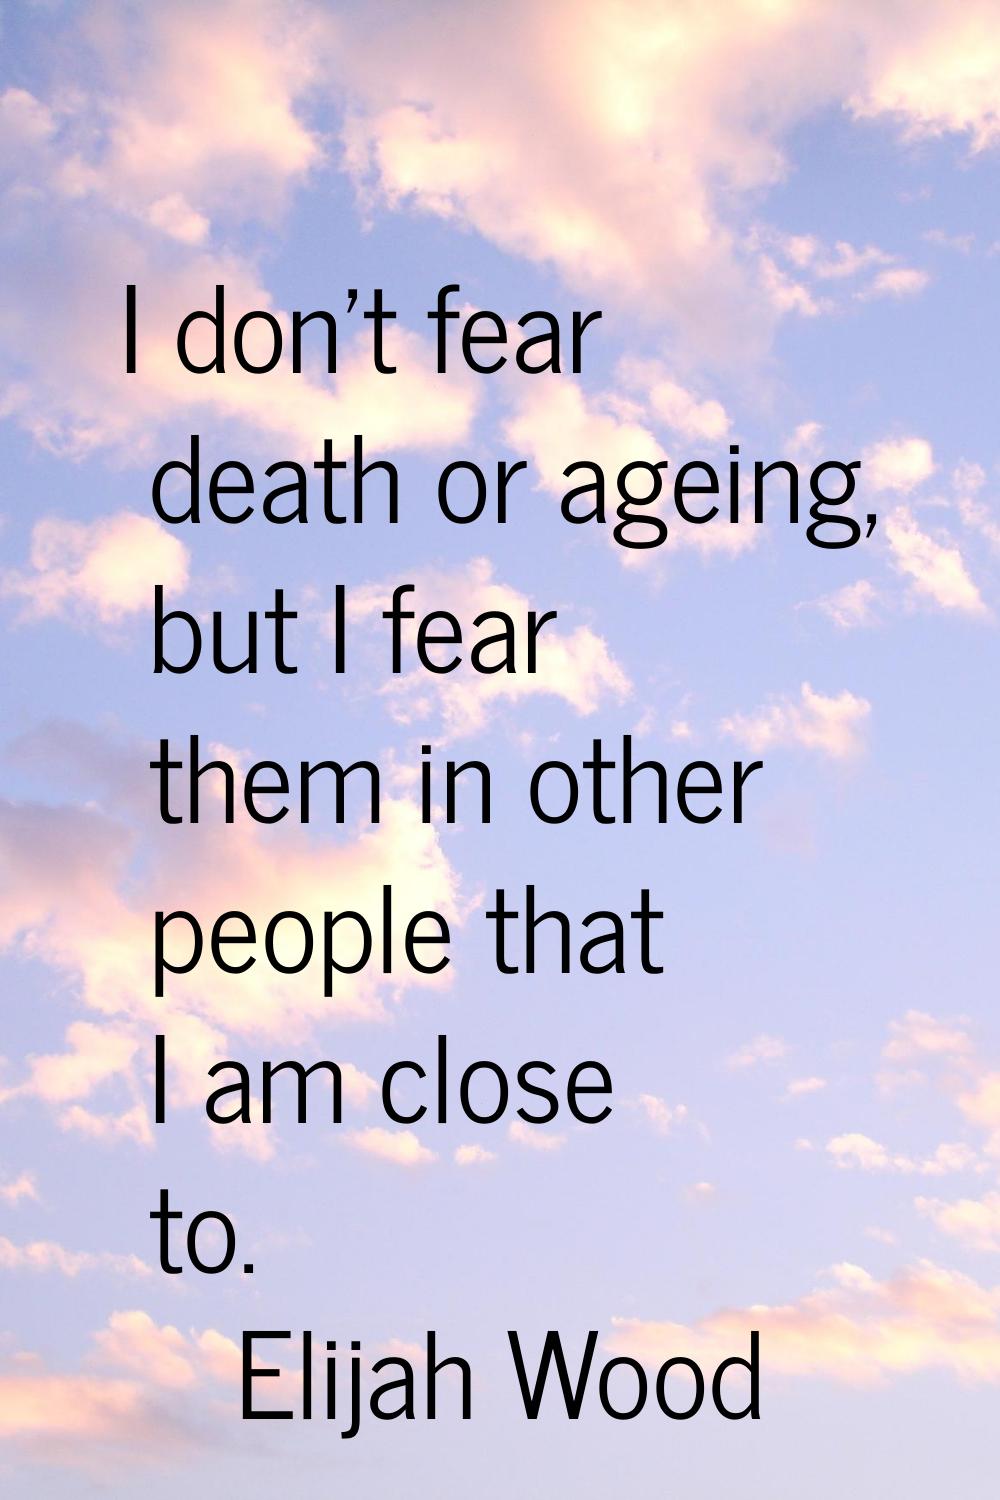 I don't fear death or ageing, but I fear them in other people that I am close to.